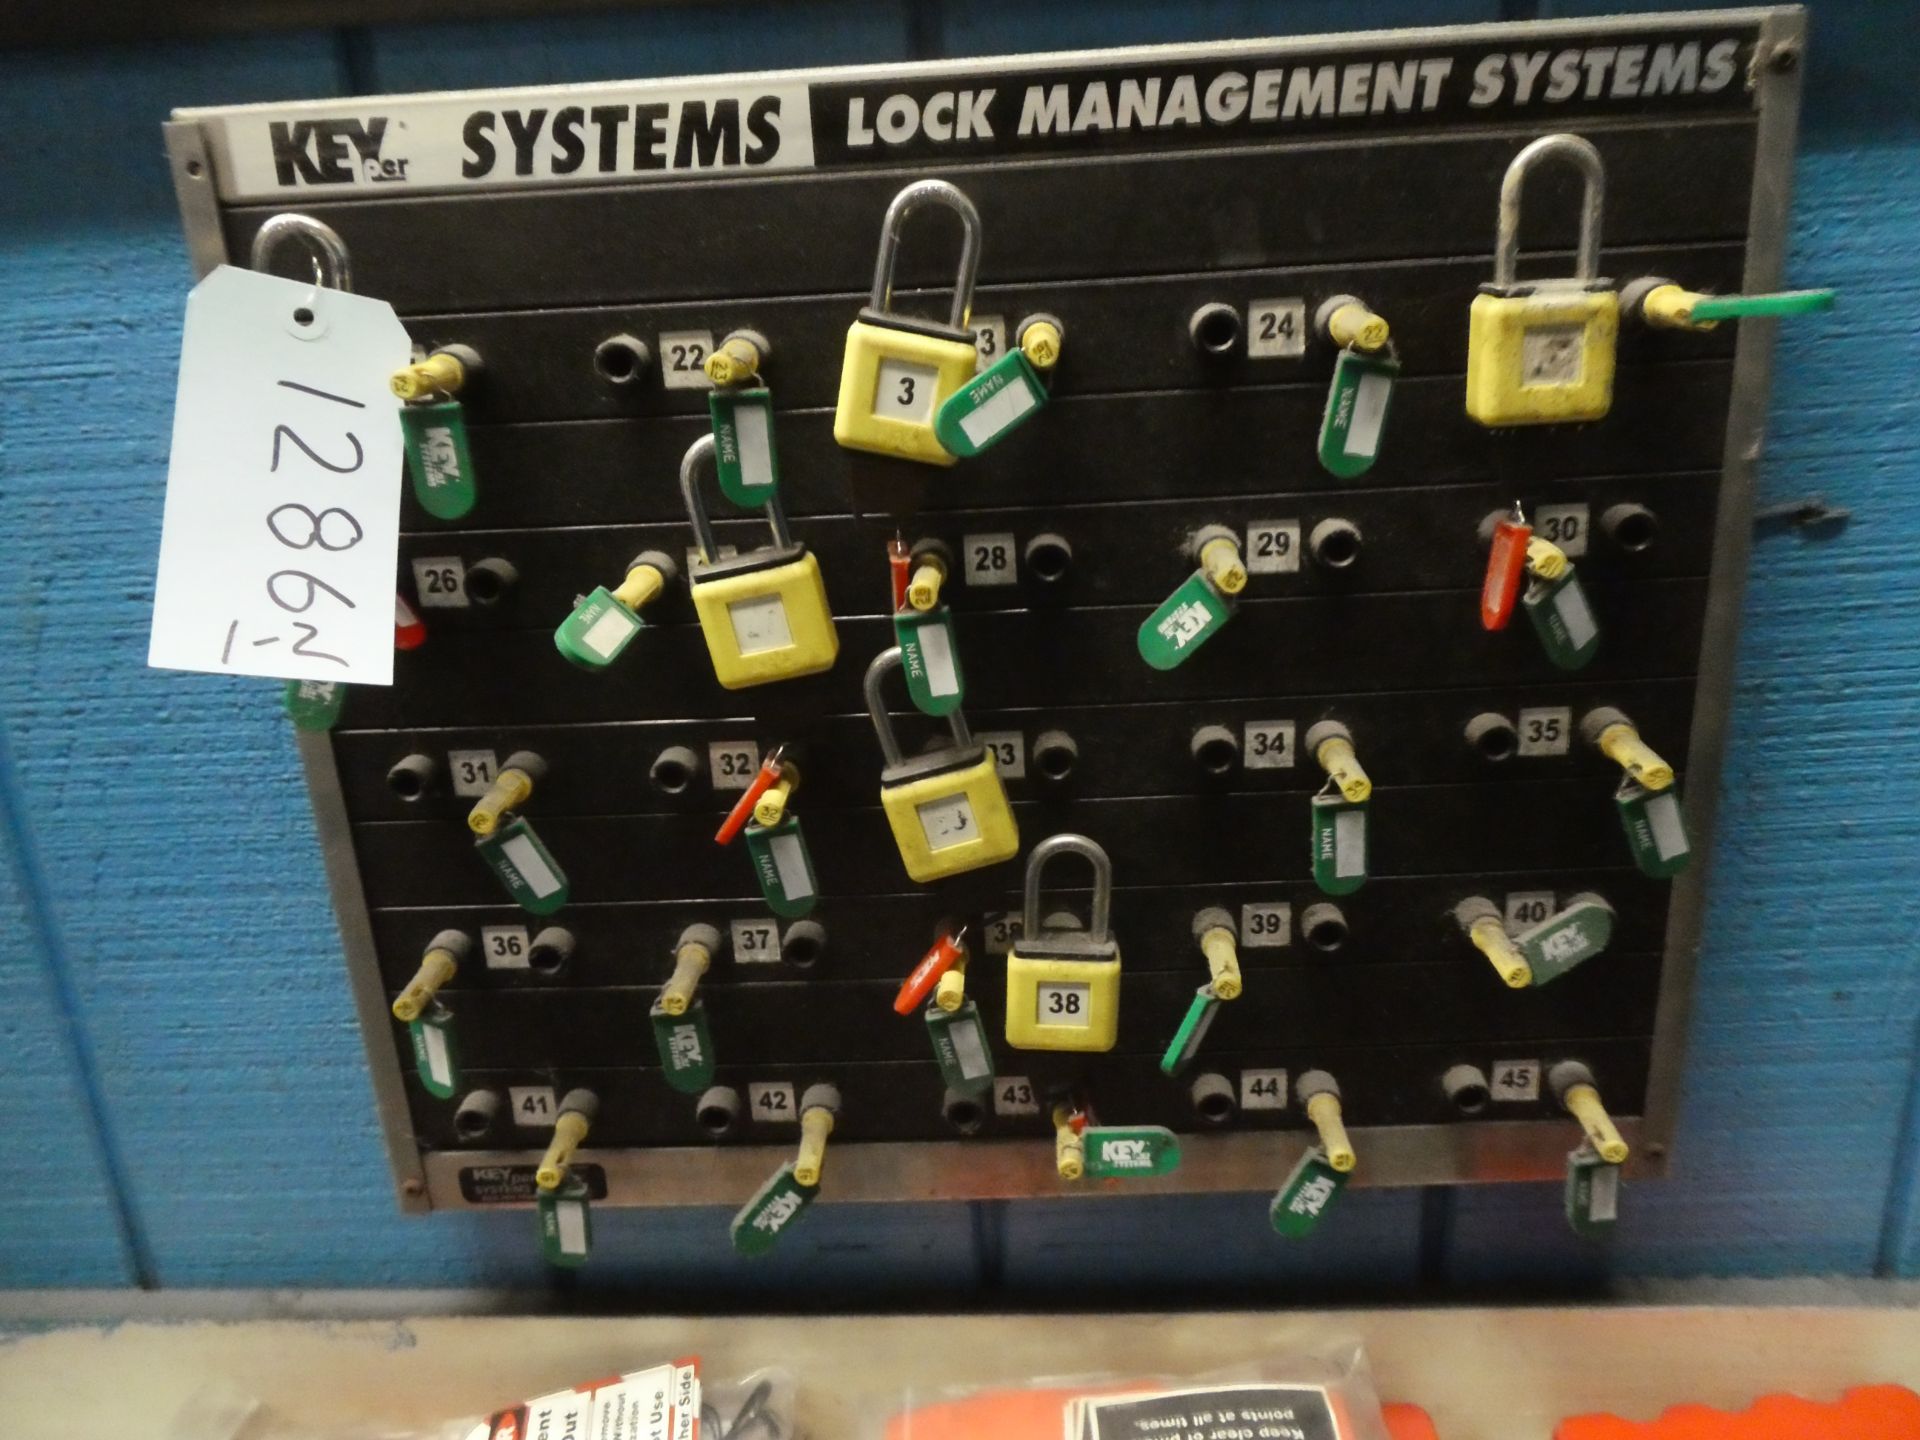 Key Systems Lock Management System